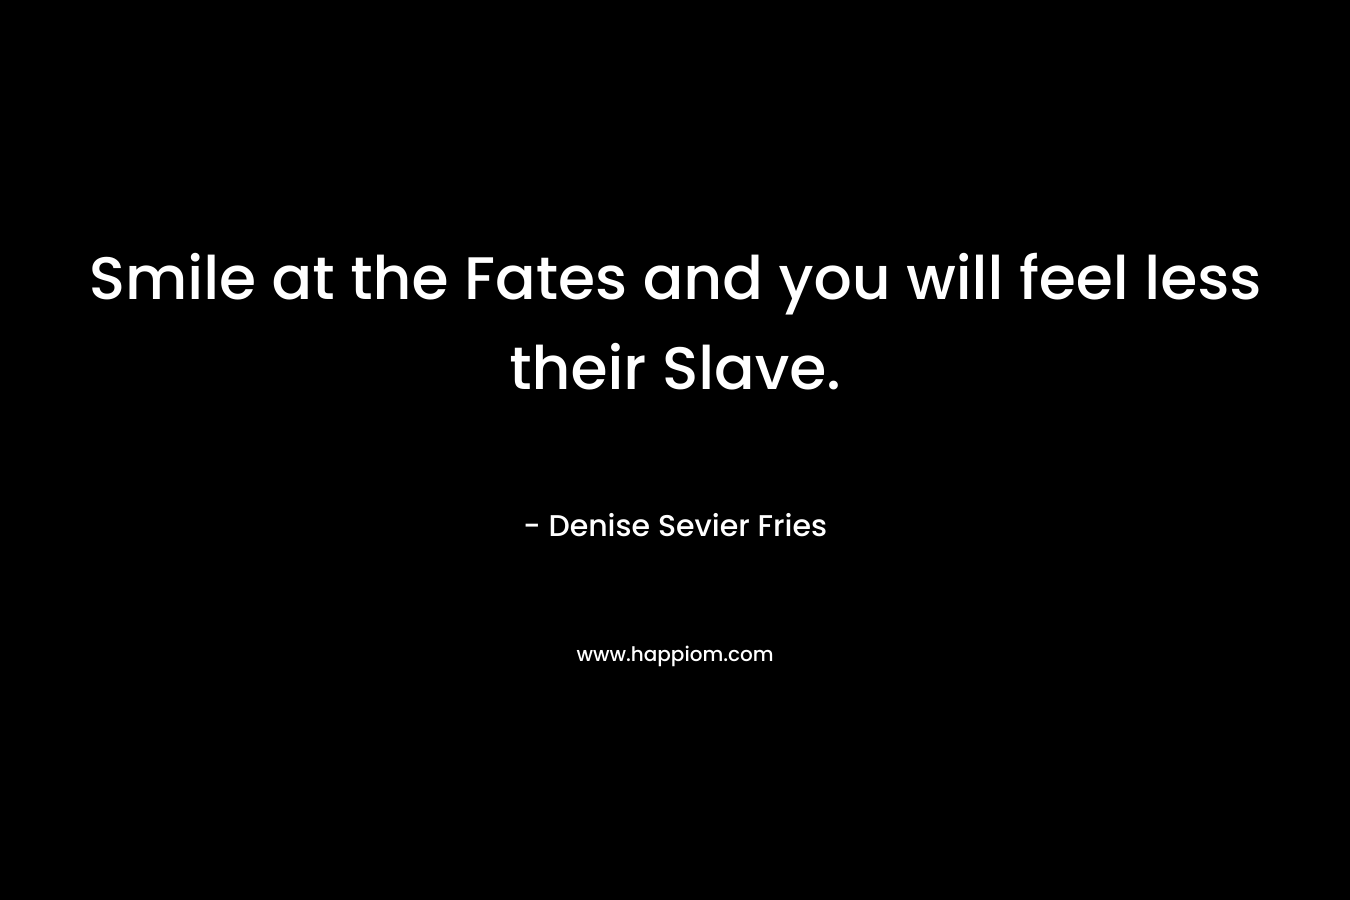 Smile at the Fates and you will feel less their Slave. – Denise Sevier Fries